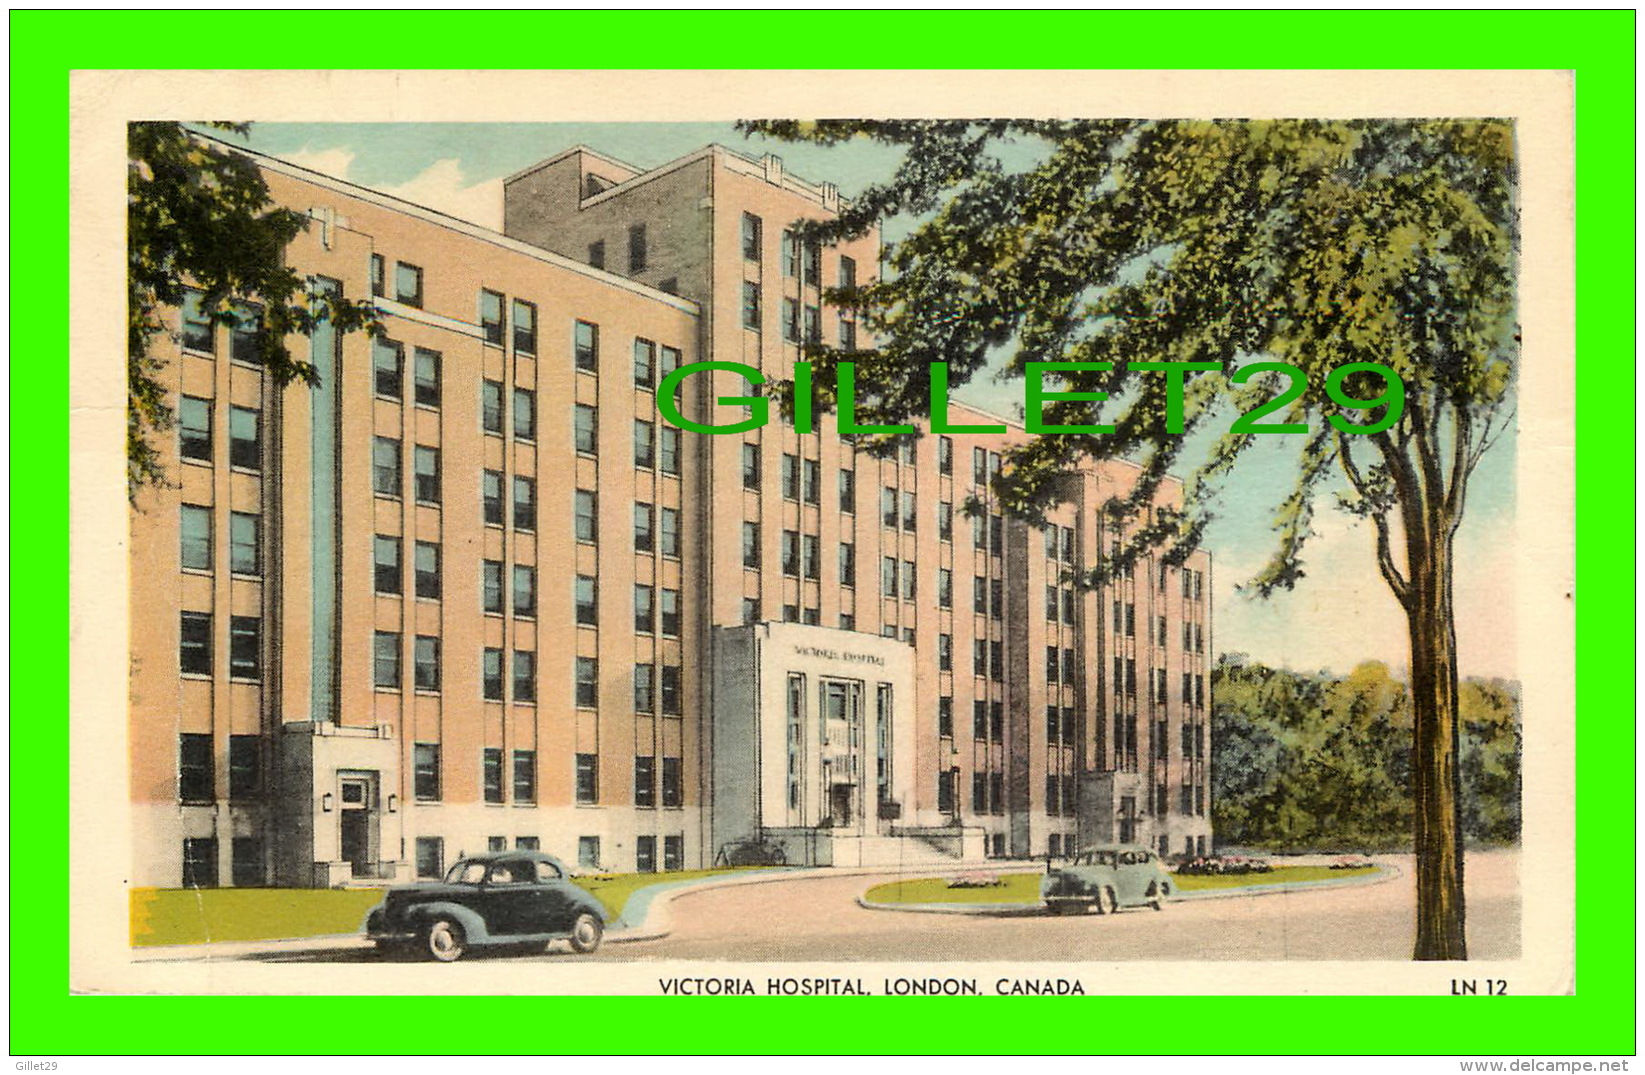 LONDON, ONTARIO - VICTORIA HOSPITAL - ANIMATED WITH OLD CARS - TRAVEL IN 1958 - VALENTINE-BLACK CO LTD - - Londen